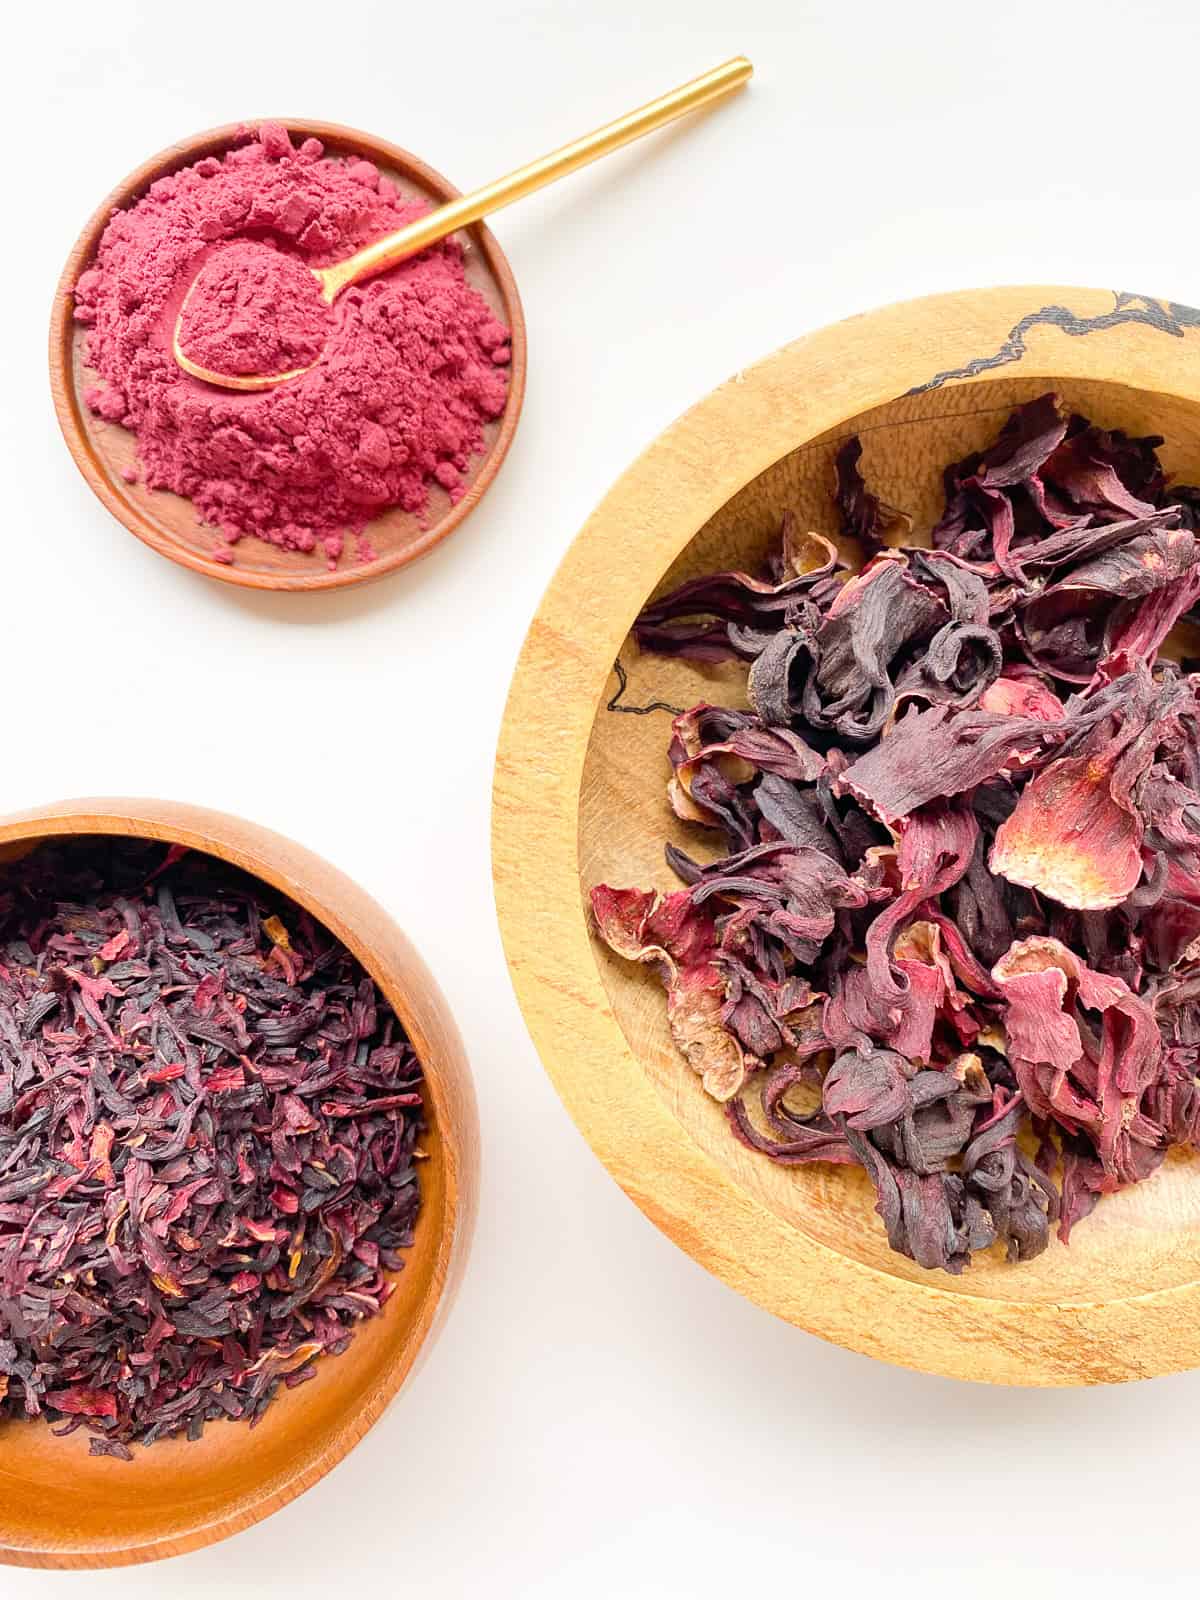 An image of three different varieties of dried hibiscus: ground, whole, and pieces.